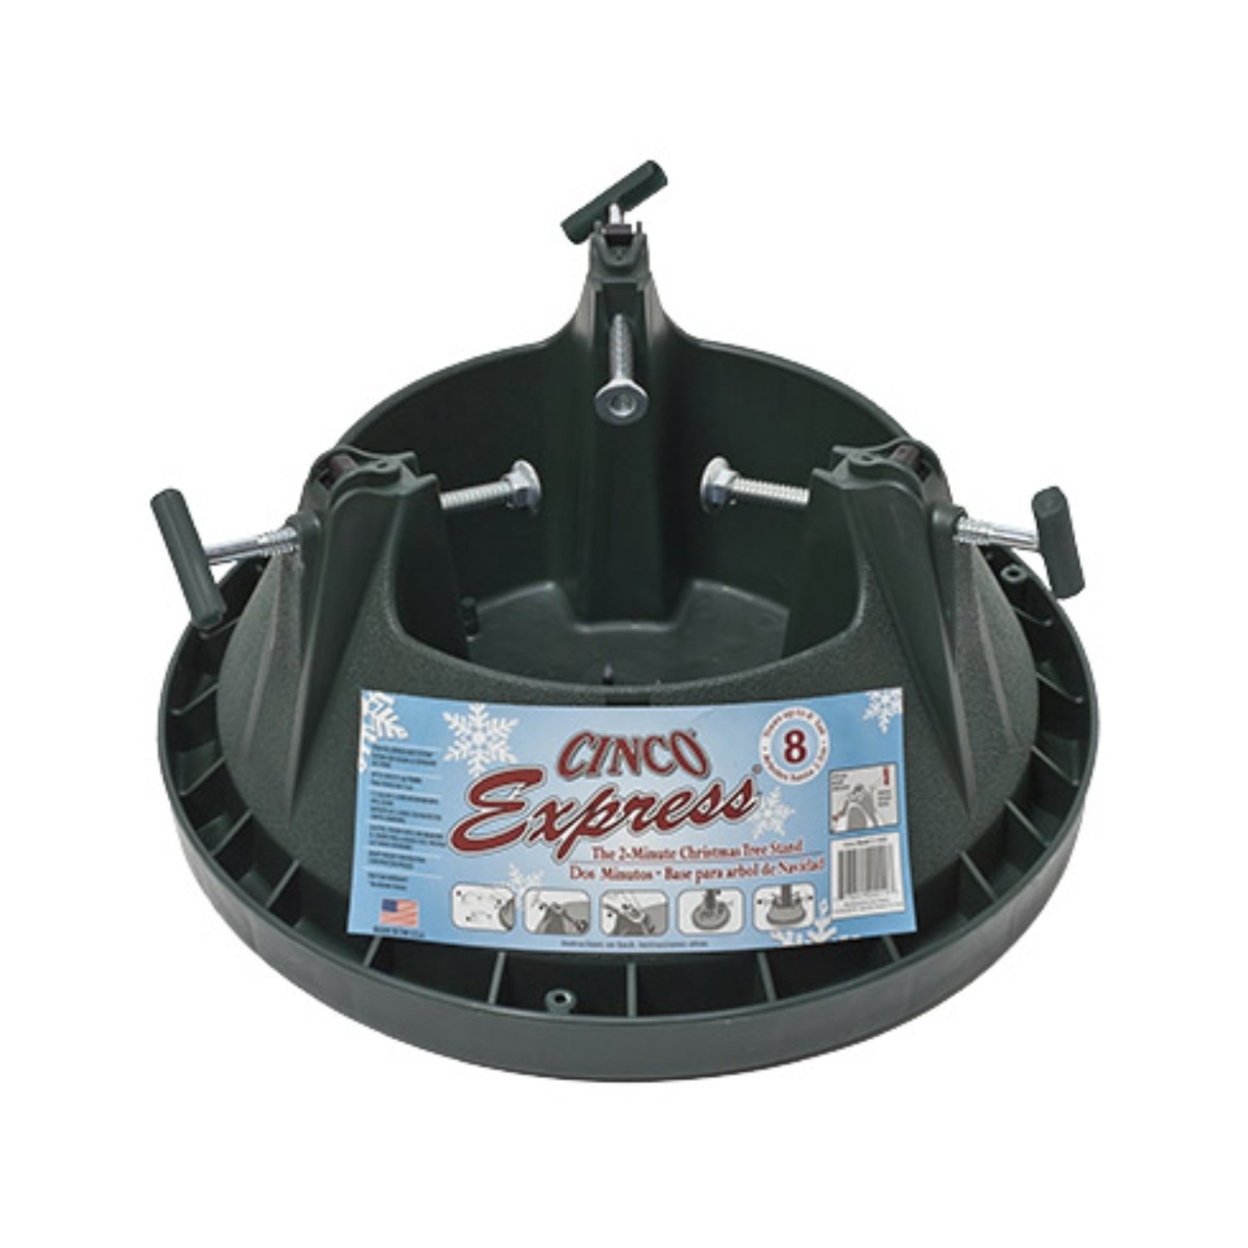 Cinco Express Christmas Tree Stand - Up To 8 Ft